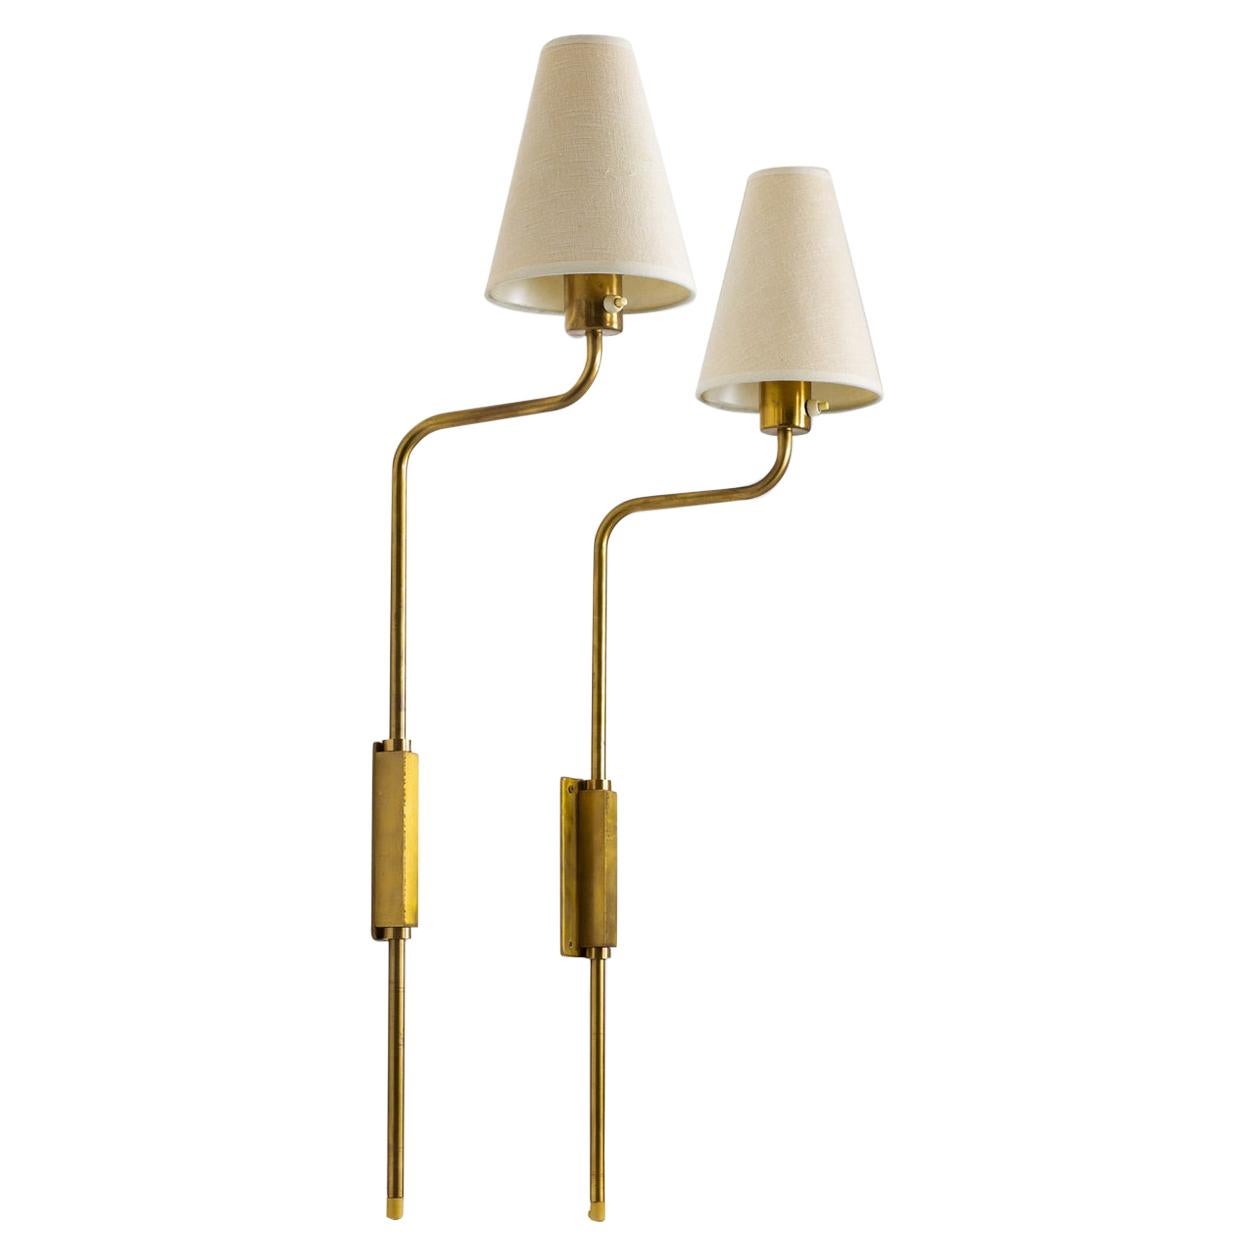 Pair of Swedish Midcentury Wall Lamps in Brass